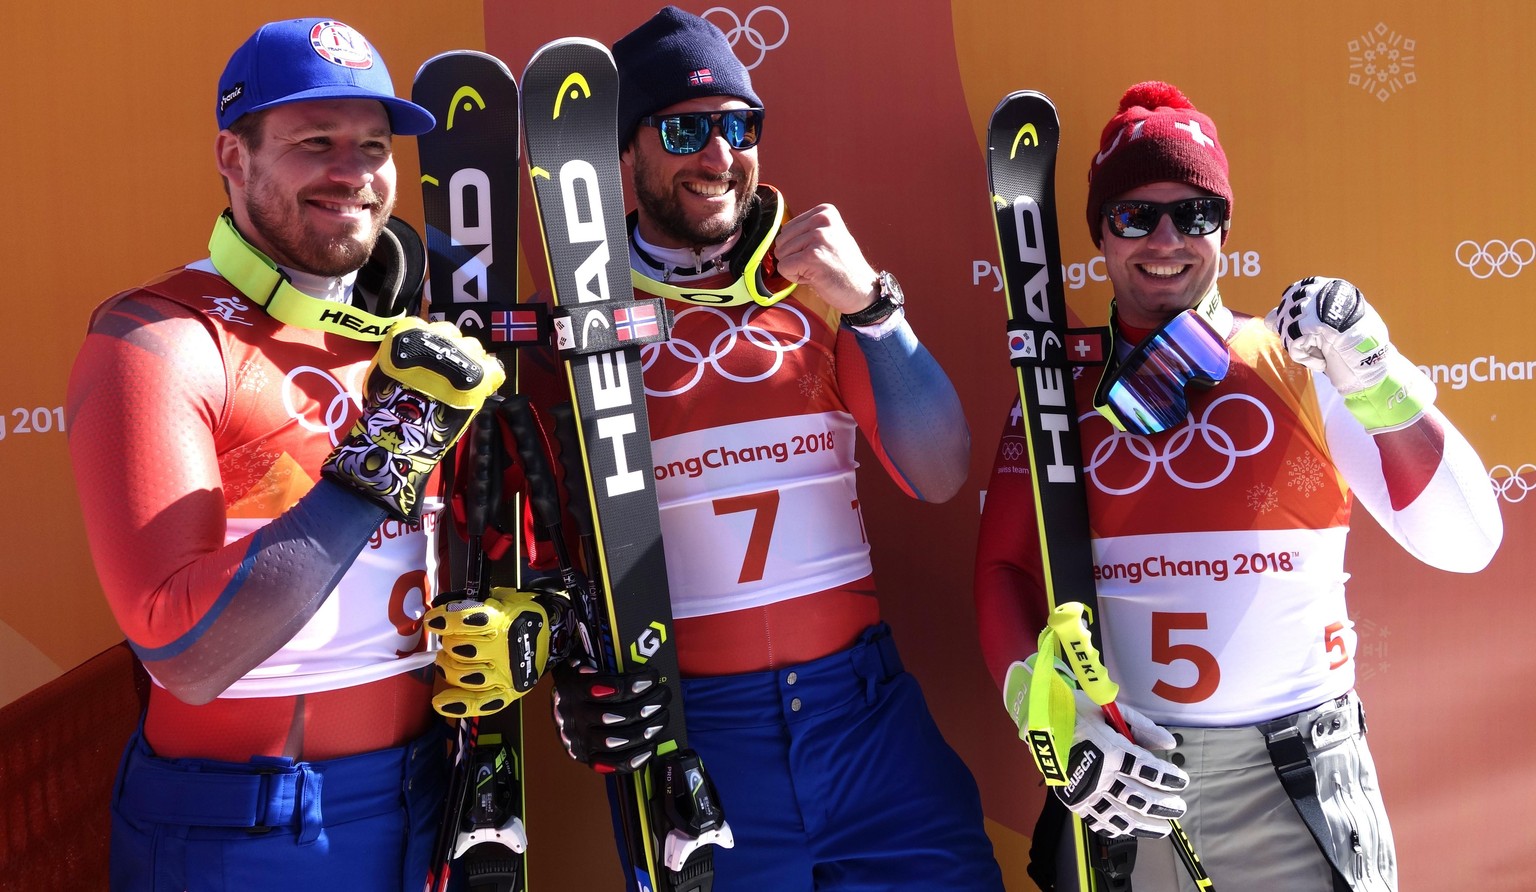 epa06526581 A handout photo made available by the International Skiing Federation (FIS) shows winner Aksel Lund Svindal of Norway, second placed Kjetil Jansrud (L) of Norway and third placed Beat Feuz ...